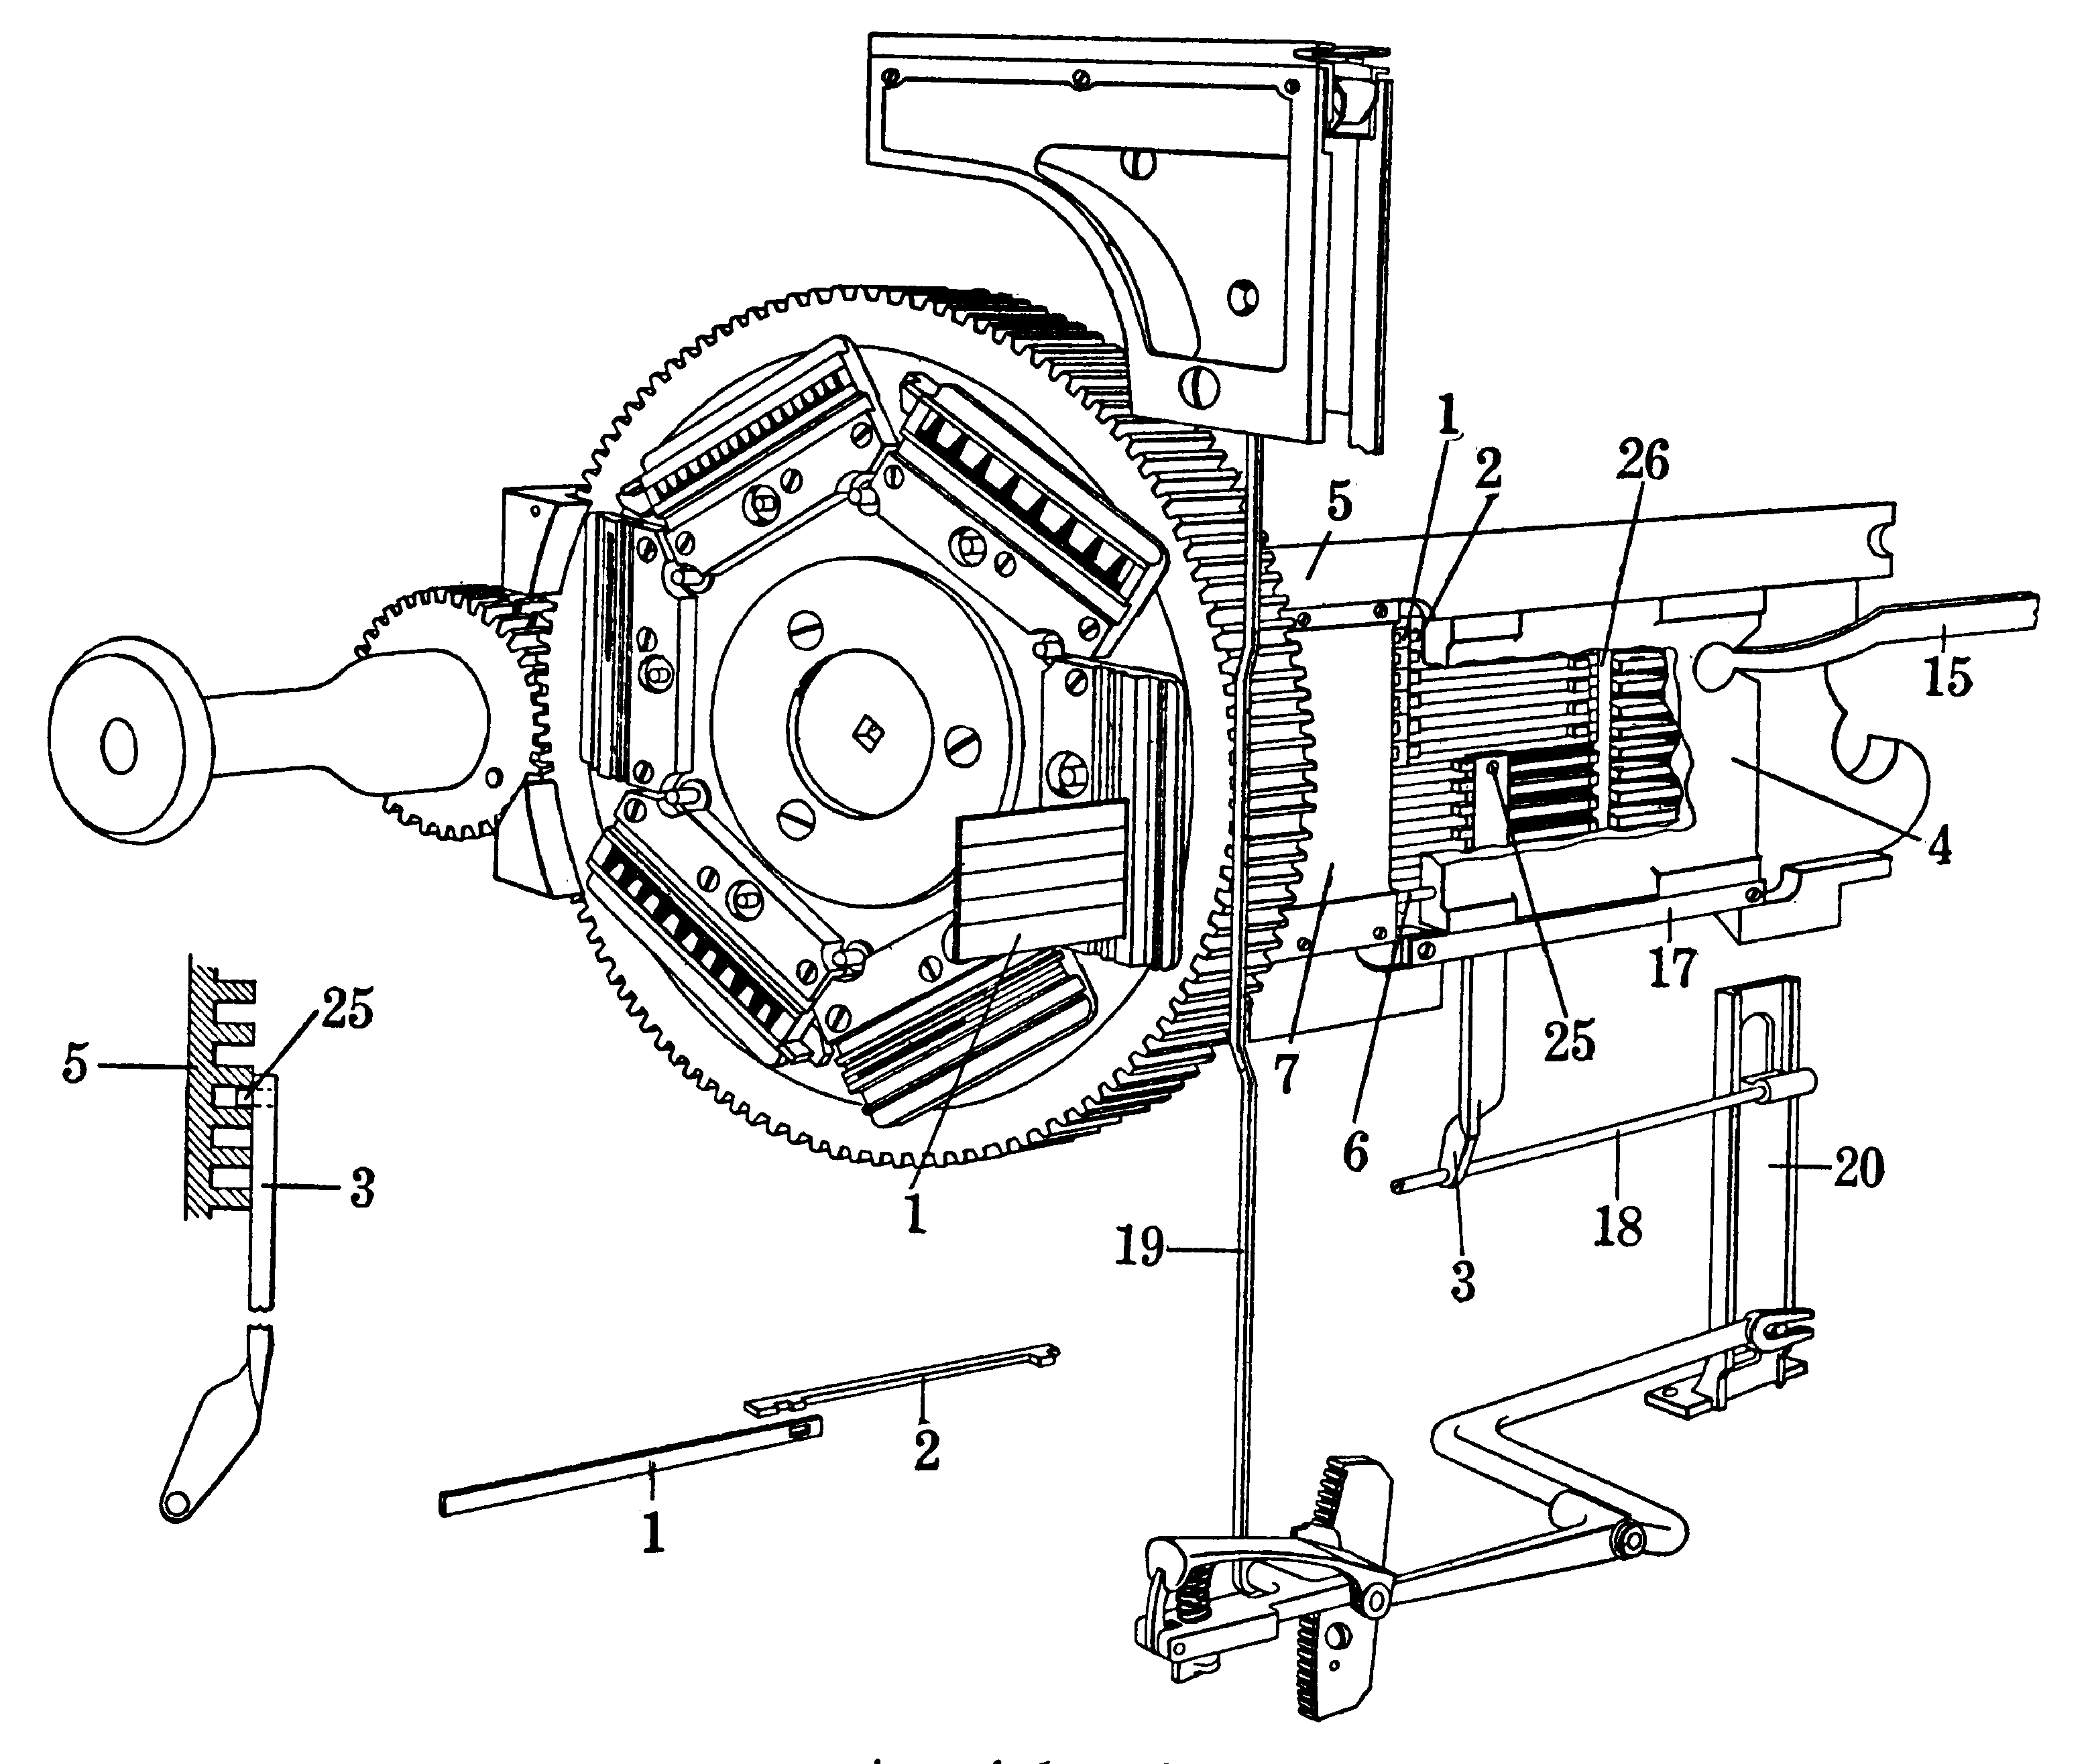 Line drawing of mechanism of the univeral ejector blade.